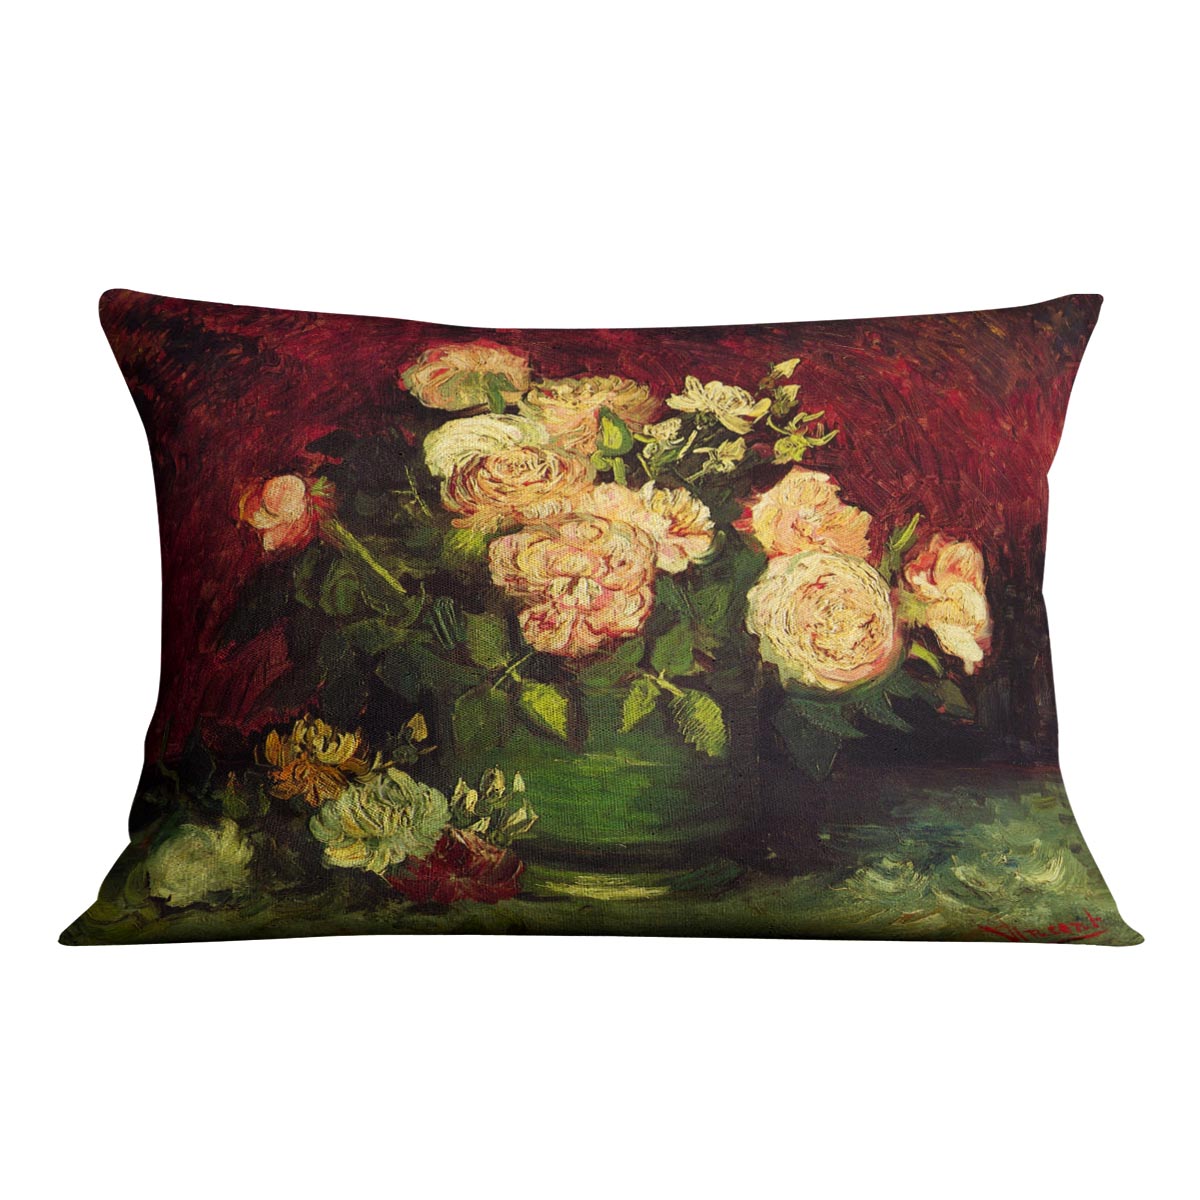 Bowl with Peonies and Roses by Van Gogh Cushion